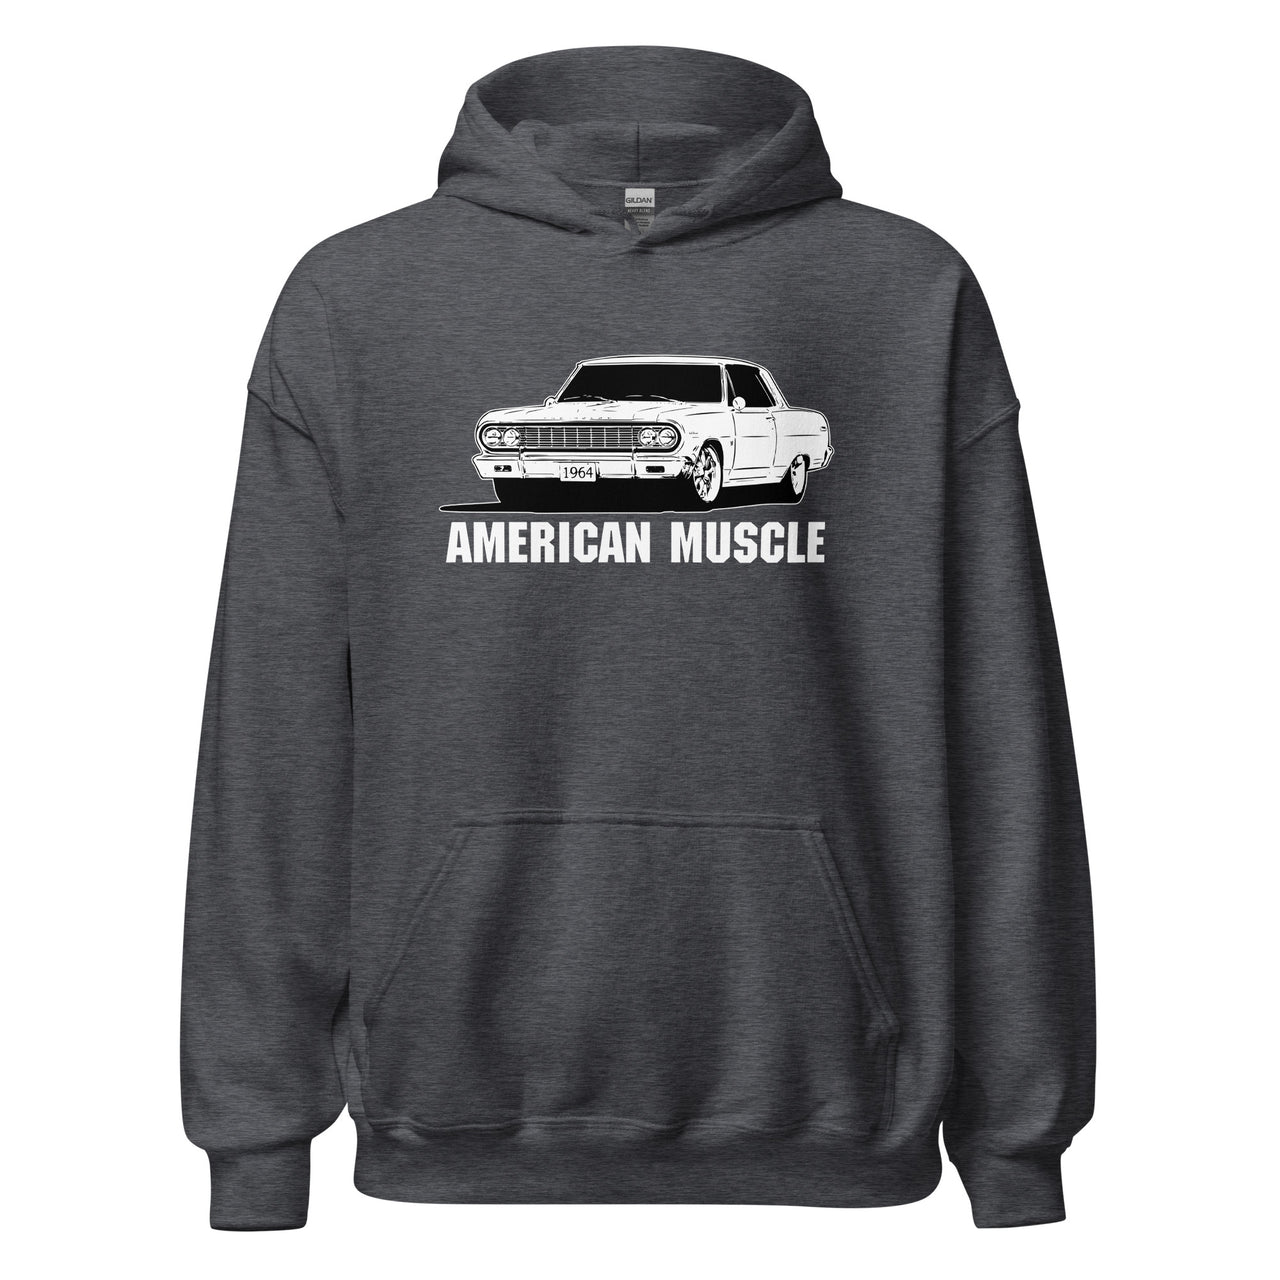 1964 Chevelle Hoodie in grey